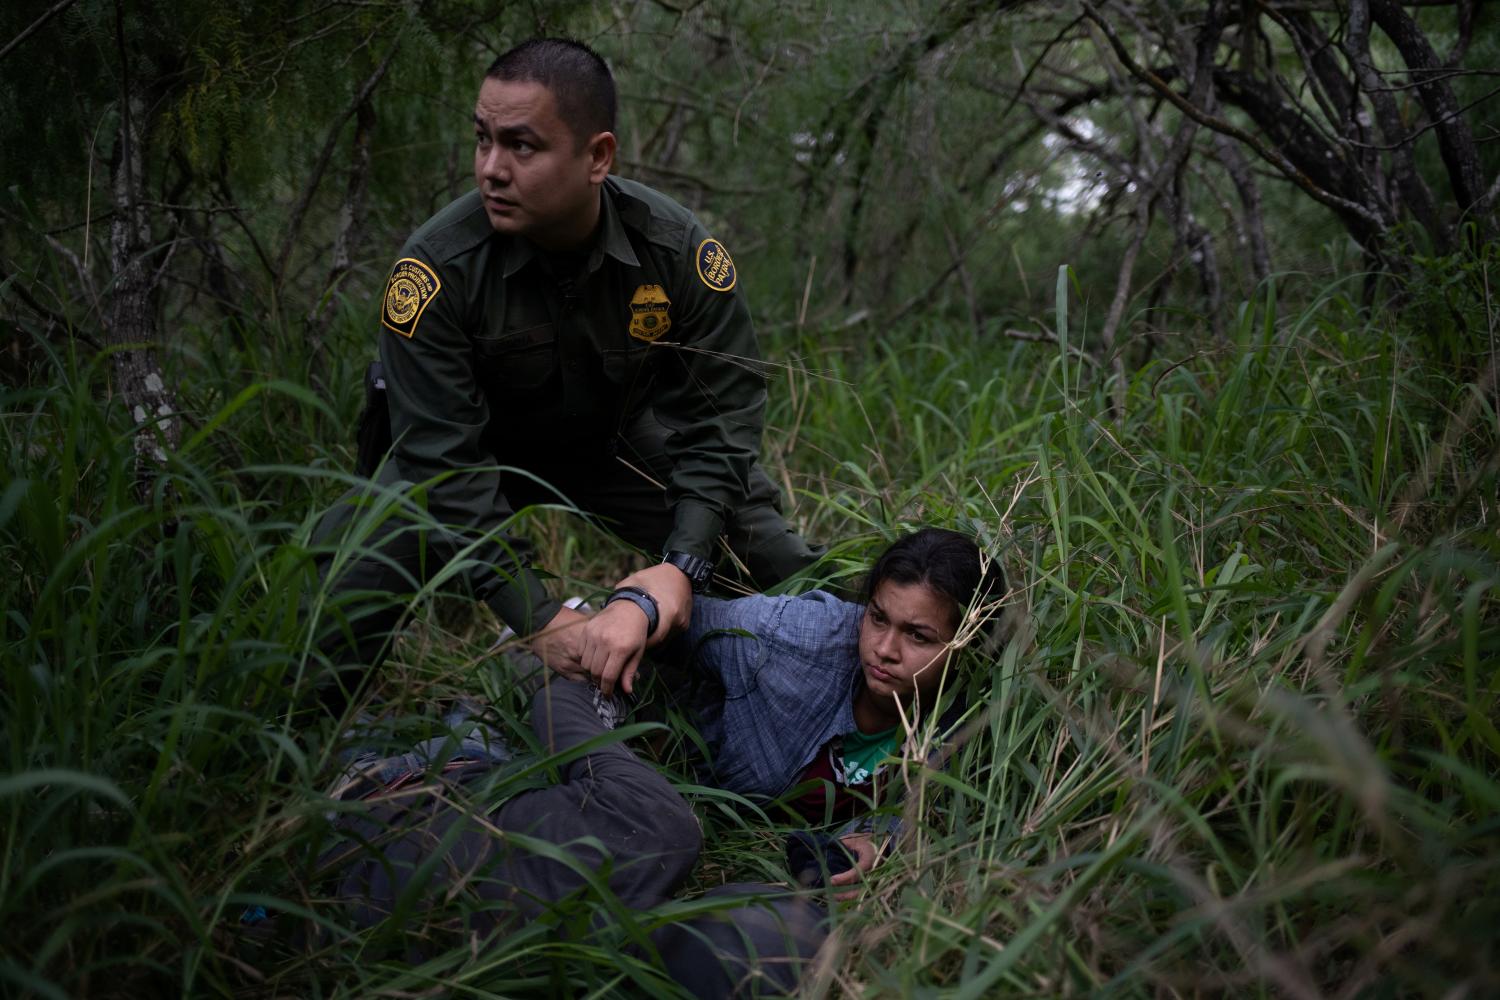 A border patrol agent apprehends a woman and a man after they were caught illegally crossing into the U.S. border from Mexico near McAllen, Texas, U.S., May 2, 2018. Reuters photographer Adrees Latif: "One could hardly tell there were people lying in the brush even as a U.S. Border Patrol agent stood over these migrants. They were tracked into the brush by their shoe prints. The group of nine had taken cover overnight and were apprehended the following morning for illegally crossing into the U.S. from Mexico." REUTERS/Adrees Latif  SEARCH "IMMIGRATION POY" FOR THIS STORY. SEARCH "REUTERS POY" FOR ALL BEST OF 2018 PACKAGES. TPX IMAGES OF THE DAY.